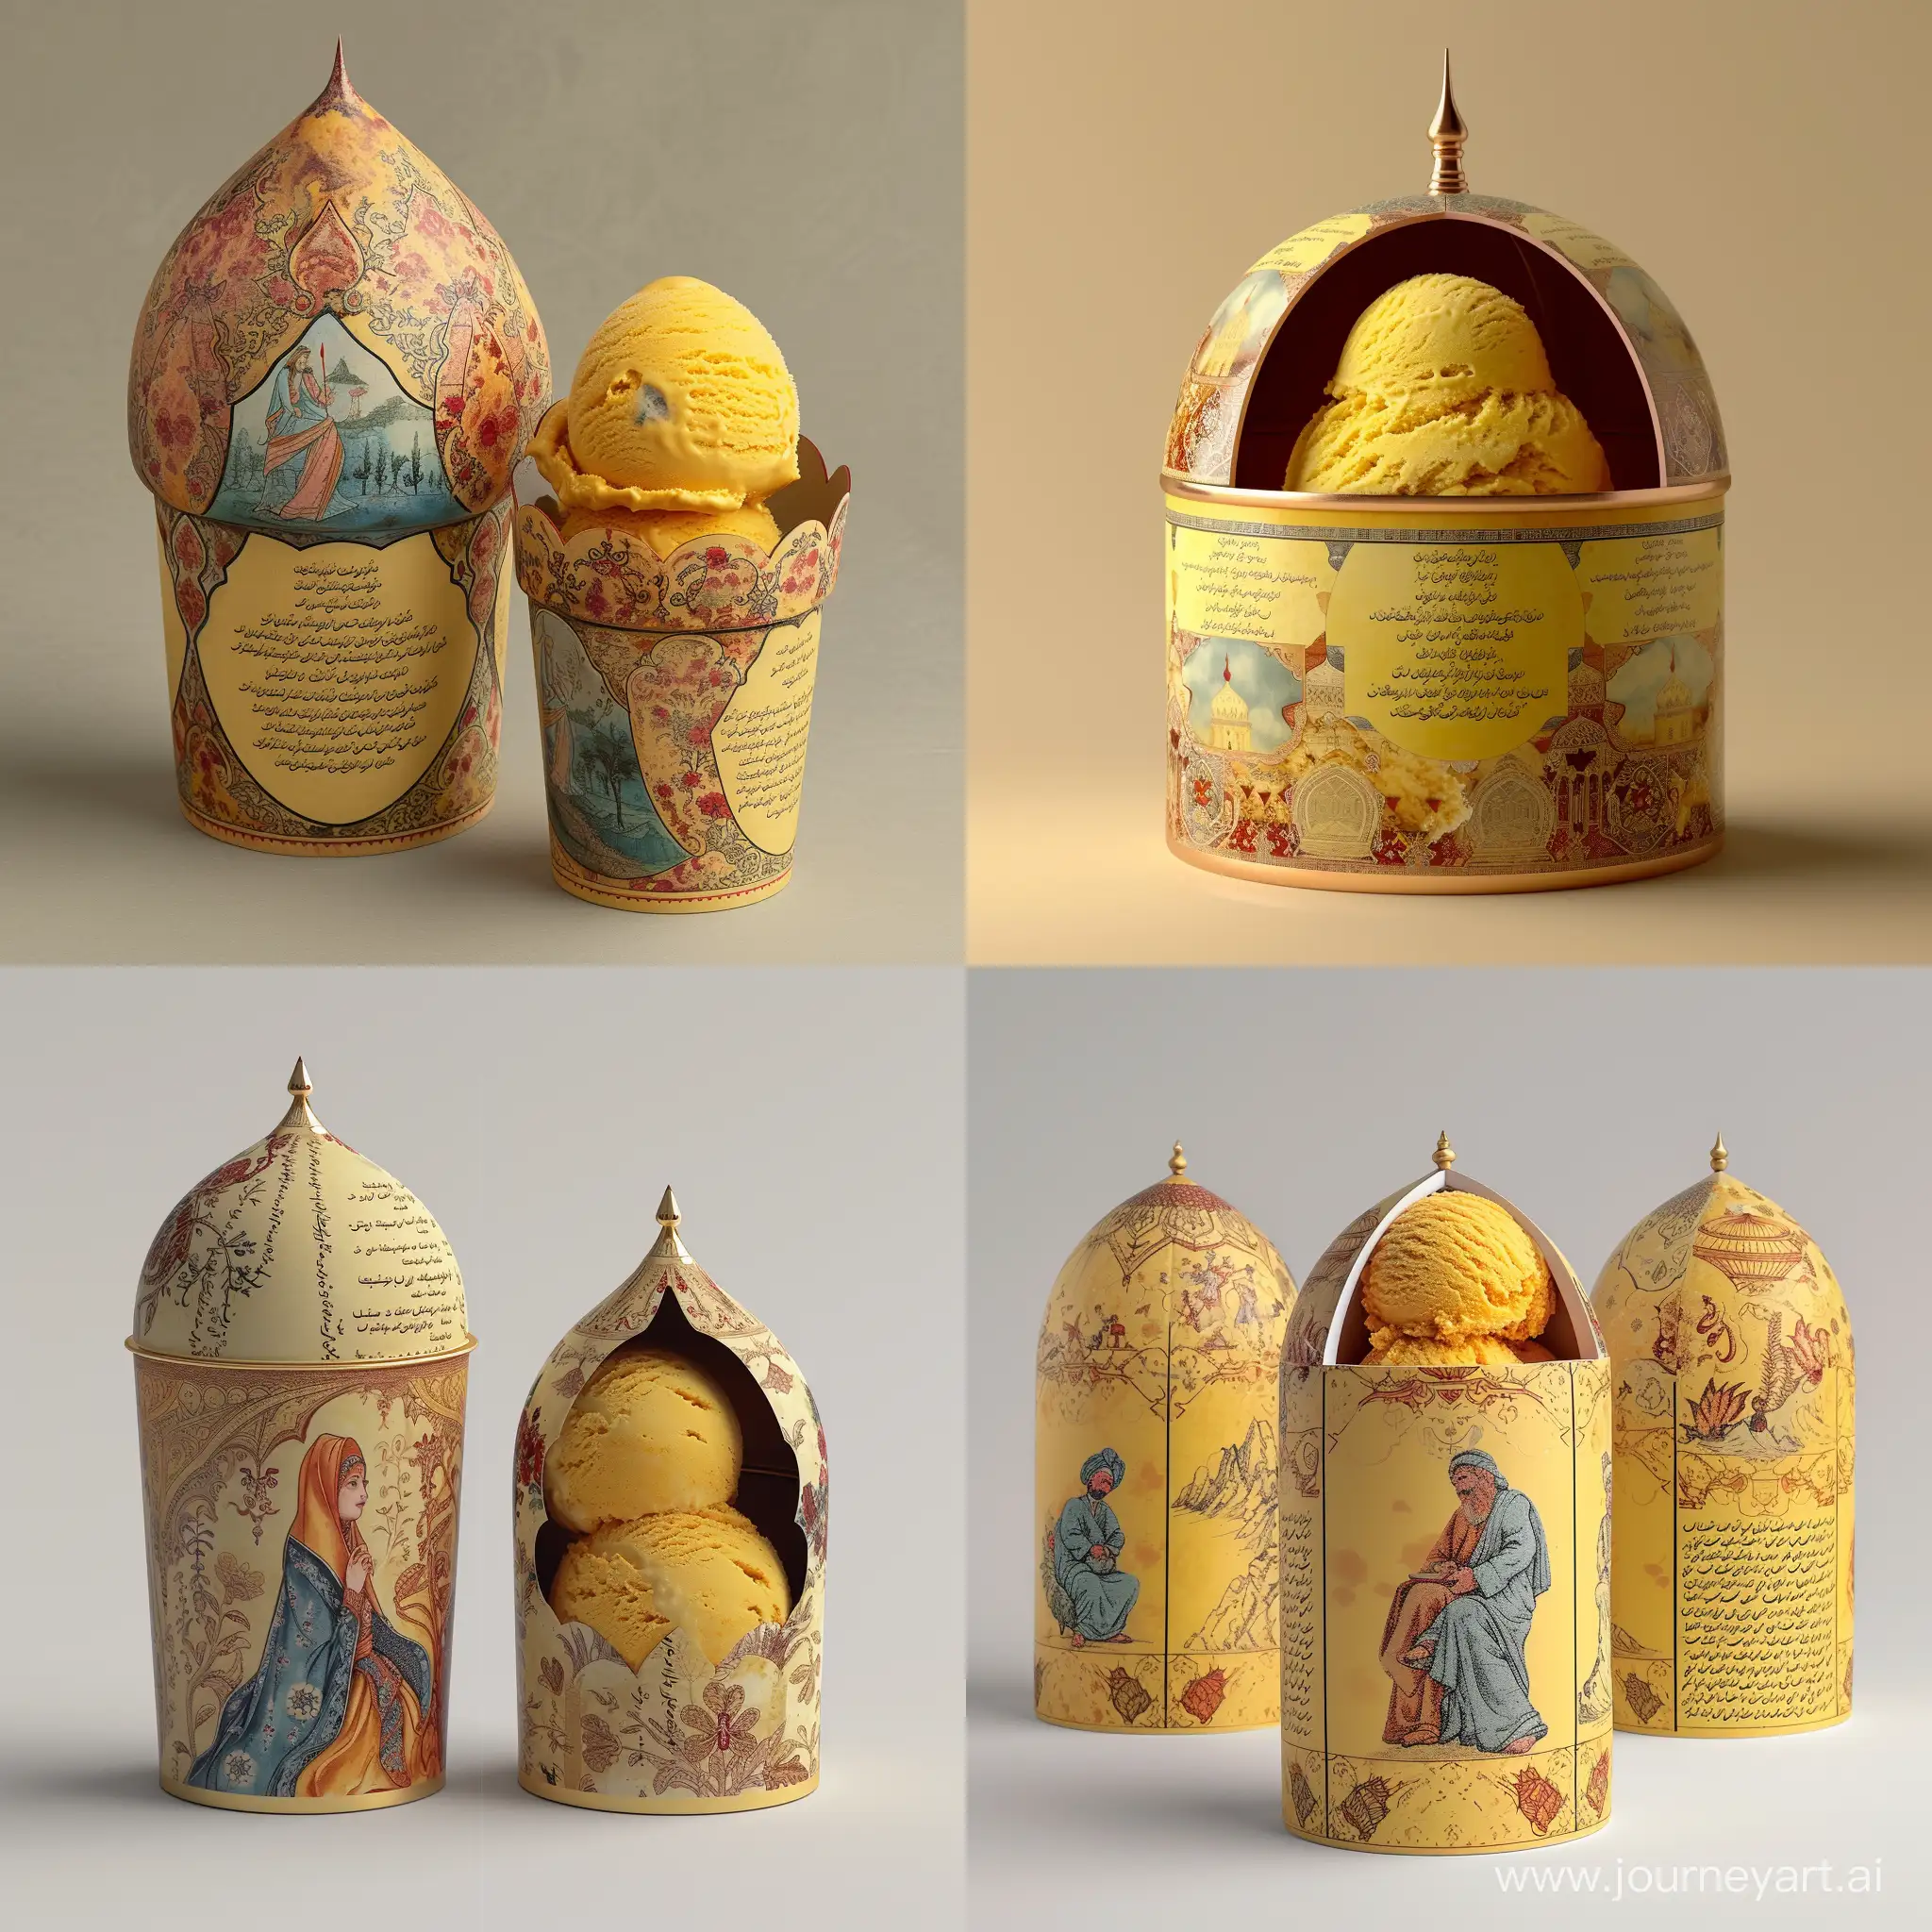 Imagine an image of The minimal design packaging for traditional Persian ice cream is designed with a stunning and environmentally friendly minimal style, using sustainable materials. It takes the shape of a luxurious opulent inspired Dome-shaped forms of Persian architecture, embellished with Persian fairytale storyboard reliefs inspired by the works of Hokusai and James Gurney+Ralph Steadman. The design features minimal yet intricate traditional motifs, creating a visually striking presentation. Inside, the luxurious saffron ice cream is held within layers adorned with poetic inscriptions, adding elegance and artistry to the experience. The entire presentation is aimed at being sustainable and eco-friendly, aligning with the current trend towards environmental consciousness. This packaging not only showcases the rich cultural heritage of Persian ice cream but also elevates it to a new level of luxury and artistry, embodying minimal sustainable opulence. It is perfect for those who appreciate both tradition and innovation in their culinary experiences.realistic style